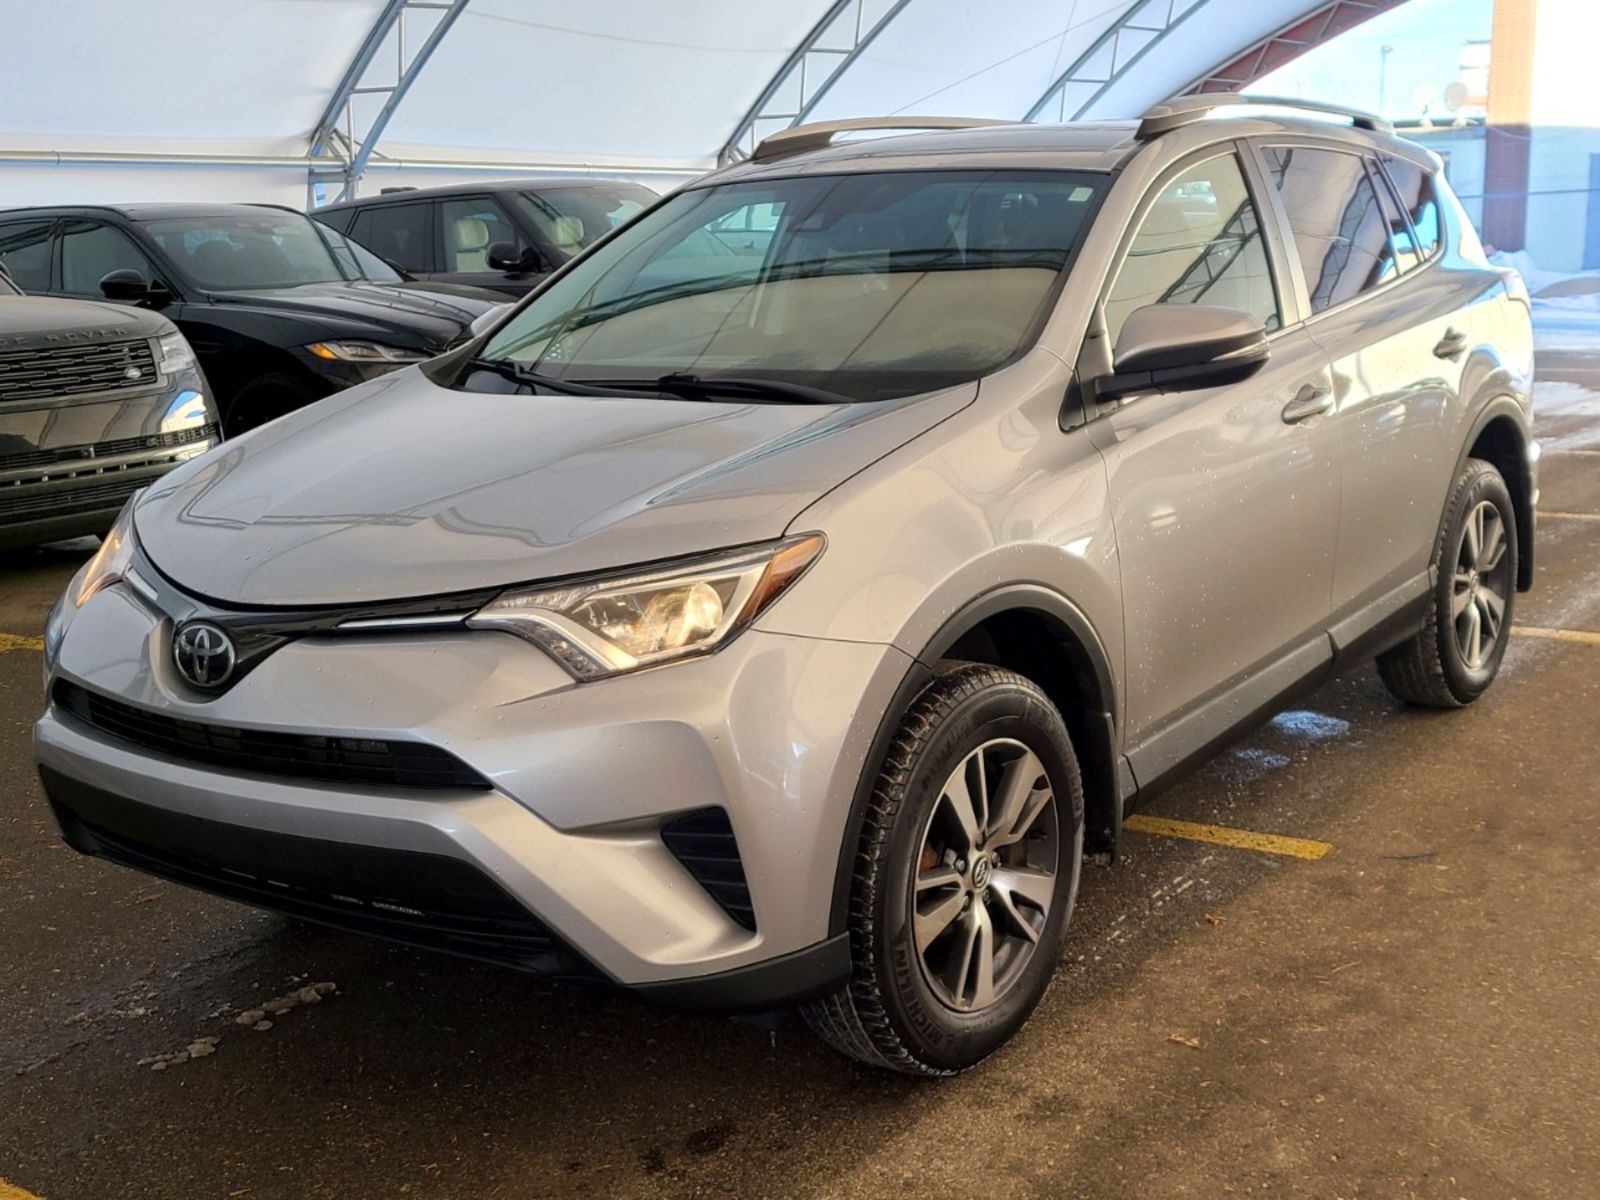 2018 Toyota RAV4 LE AWD - No Accidents, One Owner